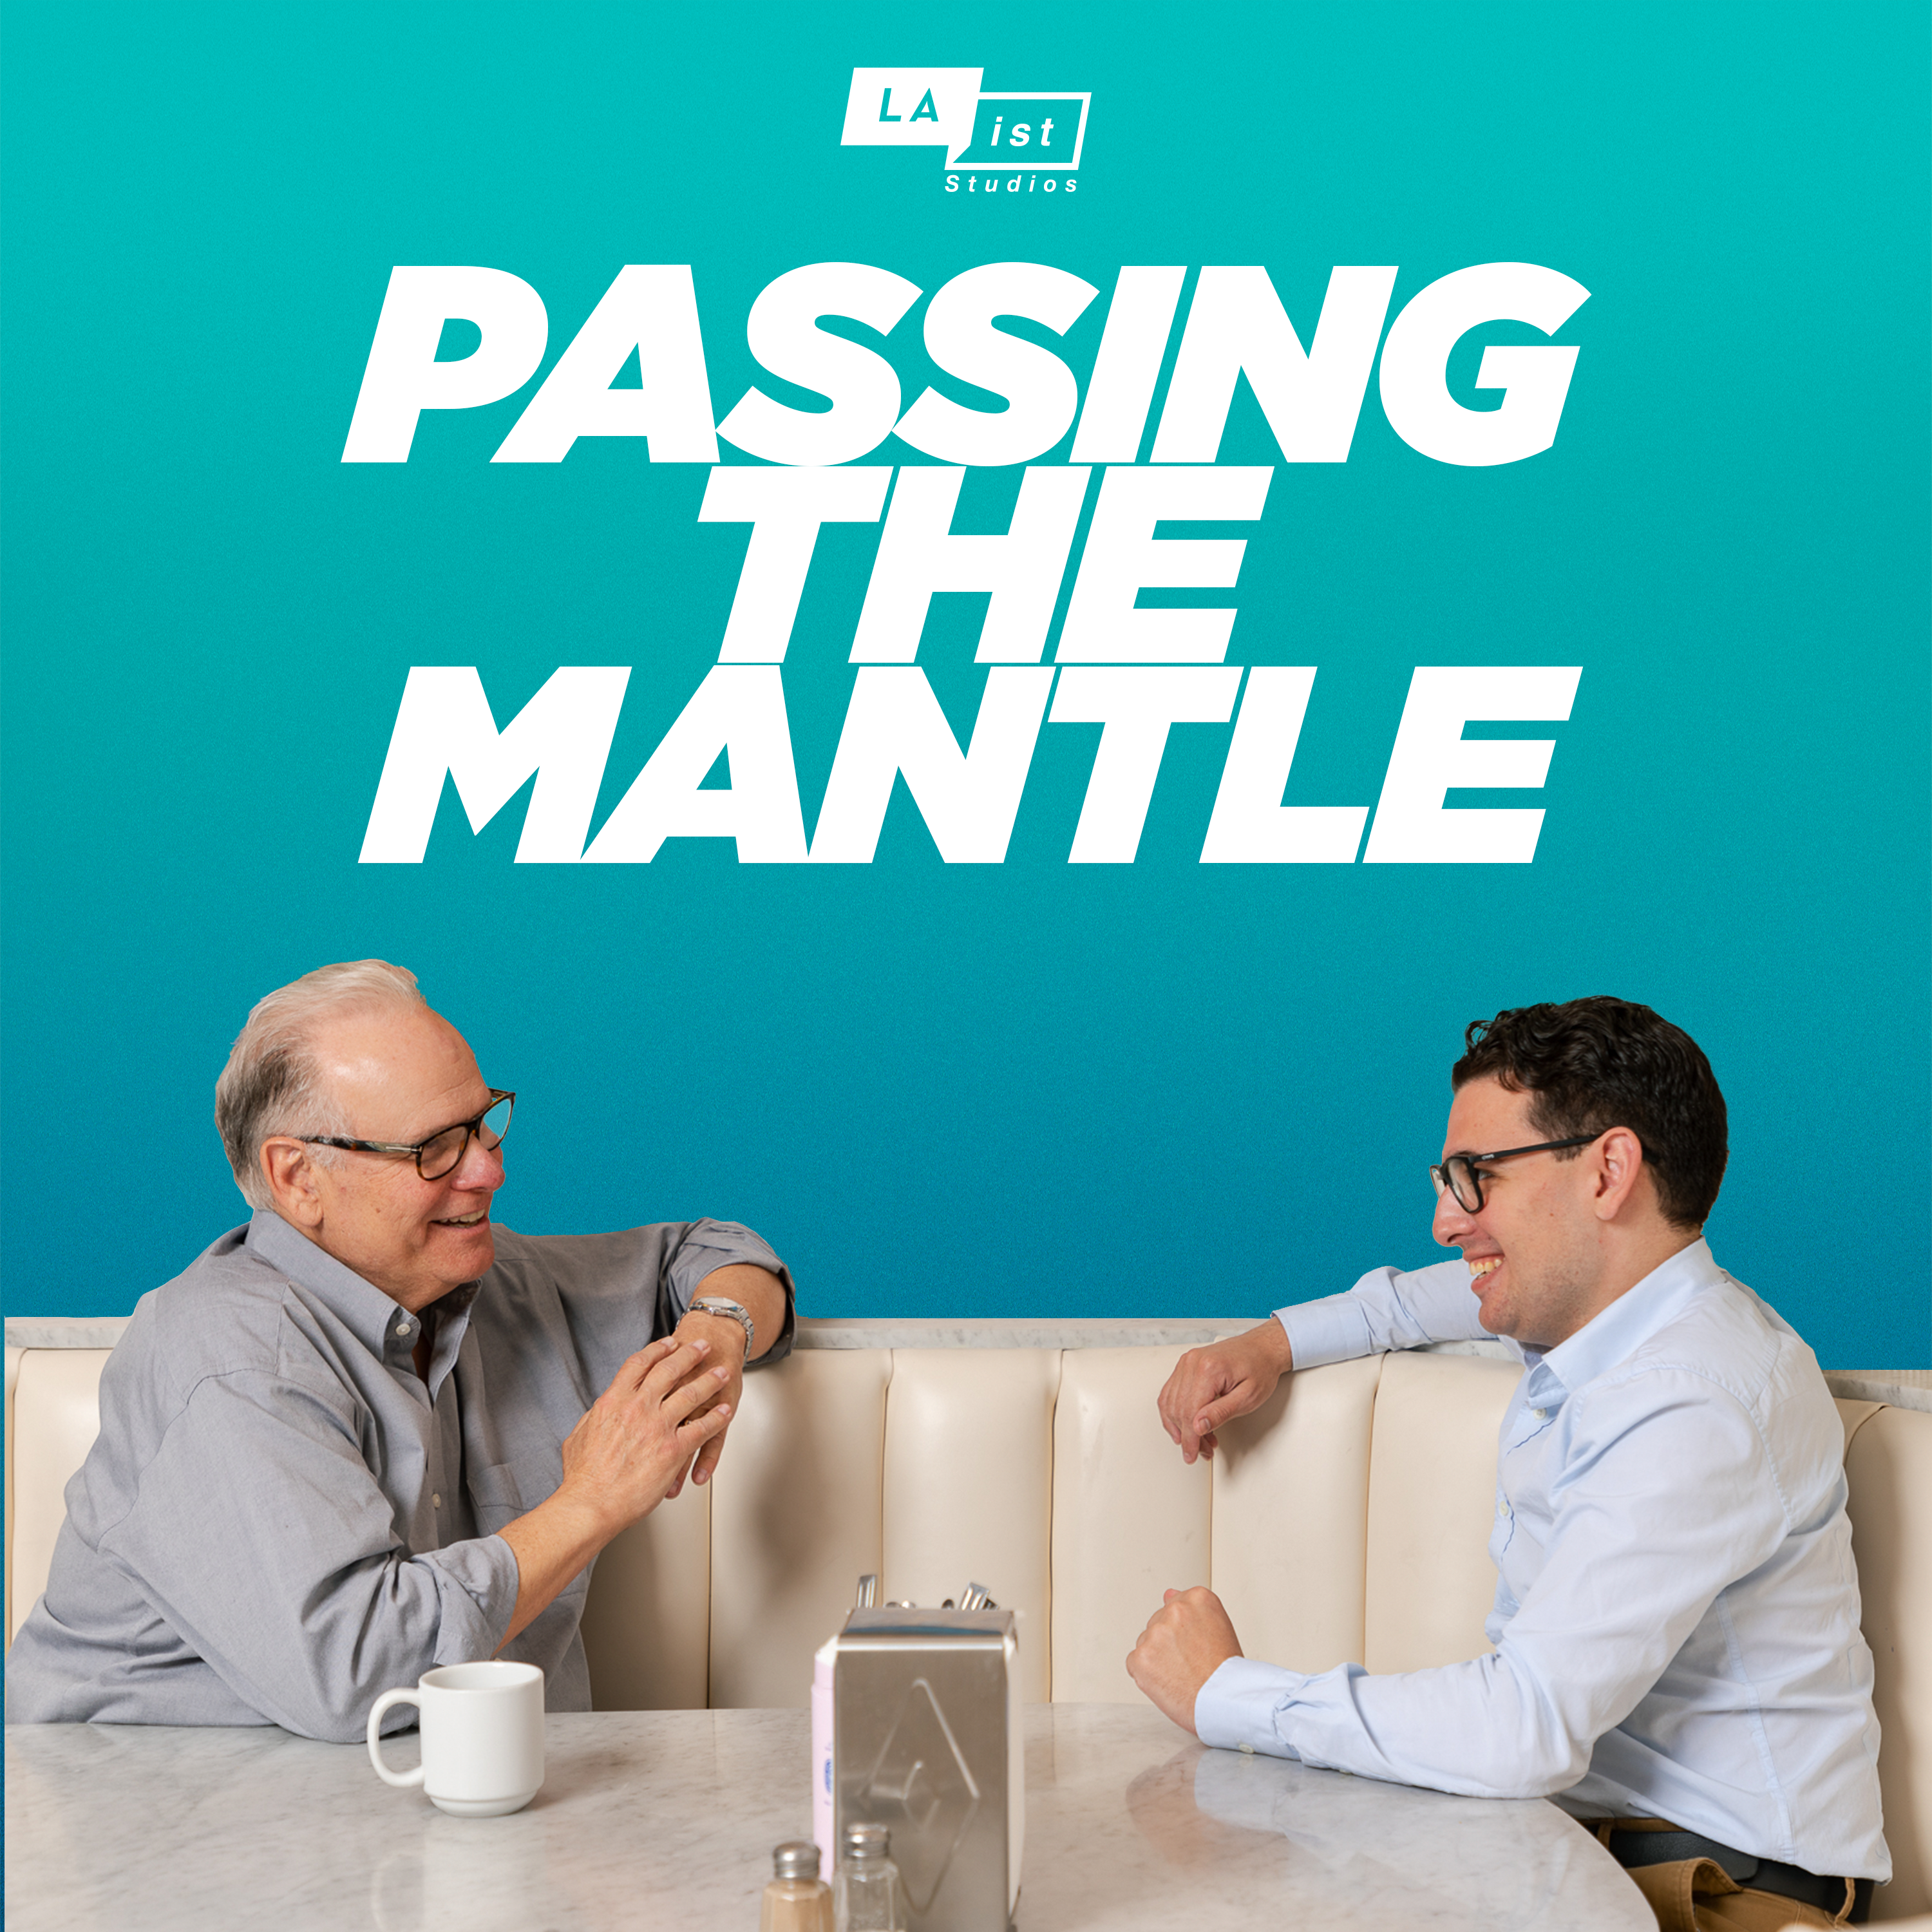 LAist Studios presents Passing The Mantle: Is Gen Z less curious than the Baby Boomers?